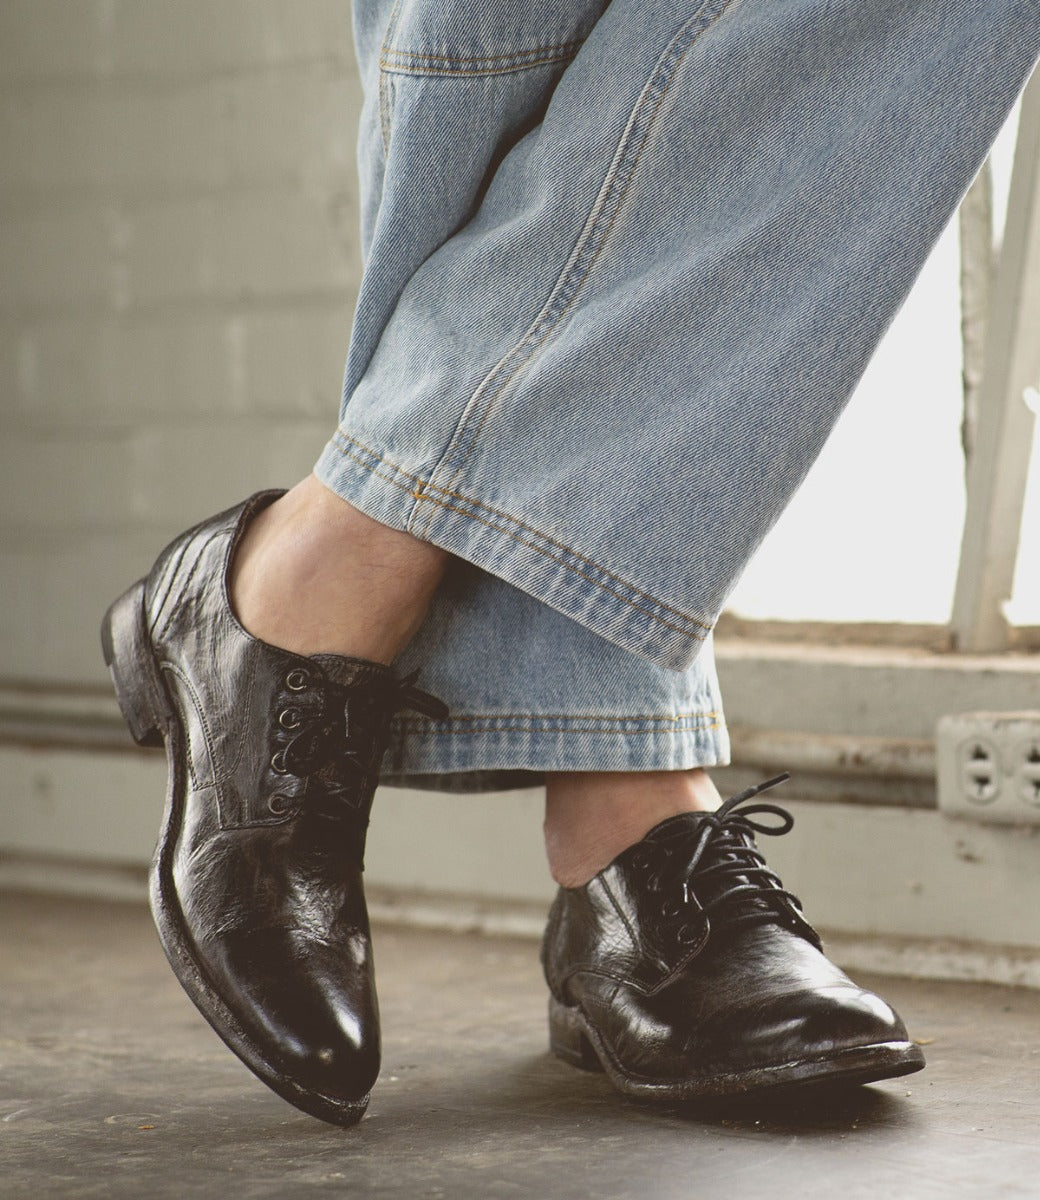 A person wearing jeans and a pair of Galao black oxford shoes by Bed Stu.